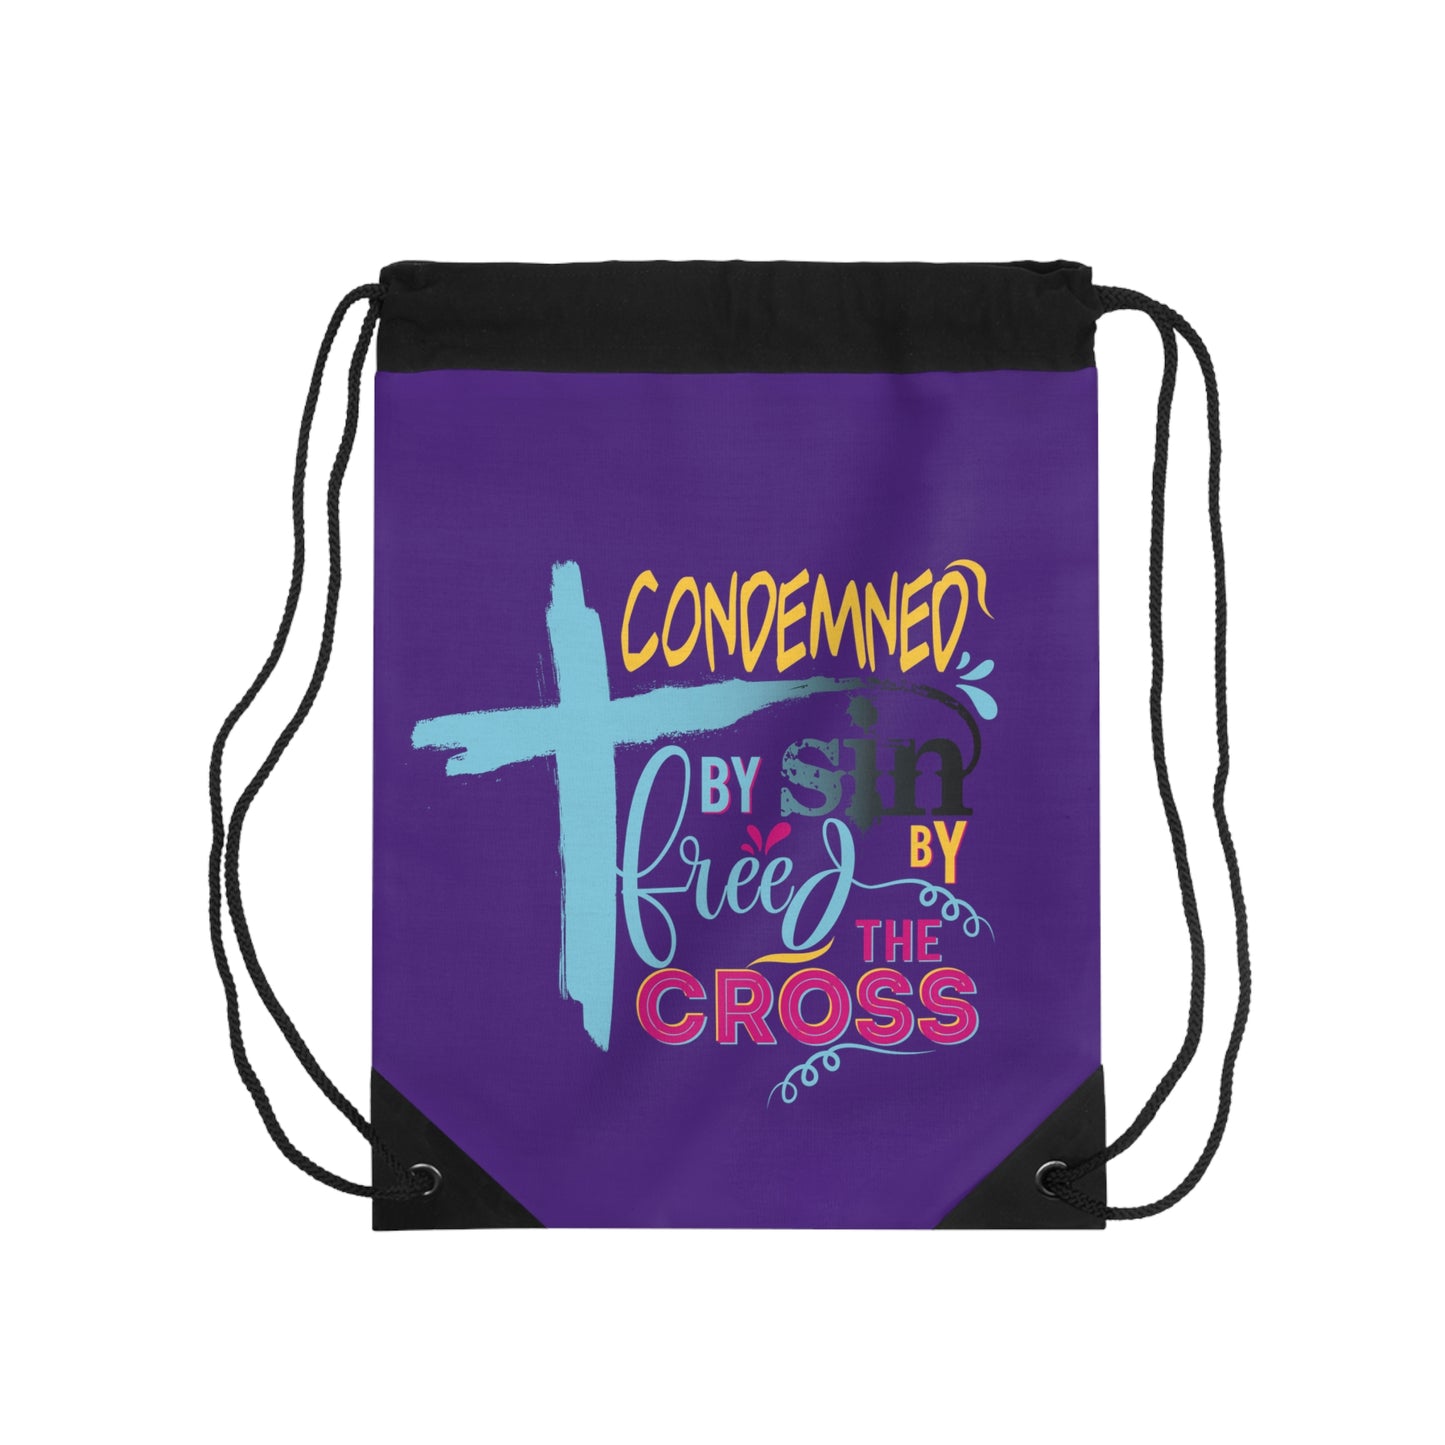 Condemned By Sin Freed By The Cross Drawstring Bag